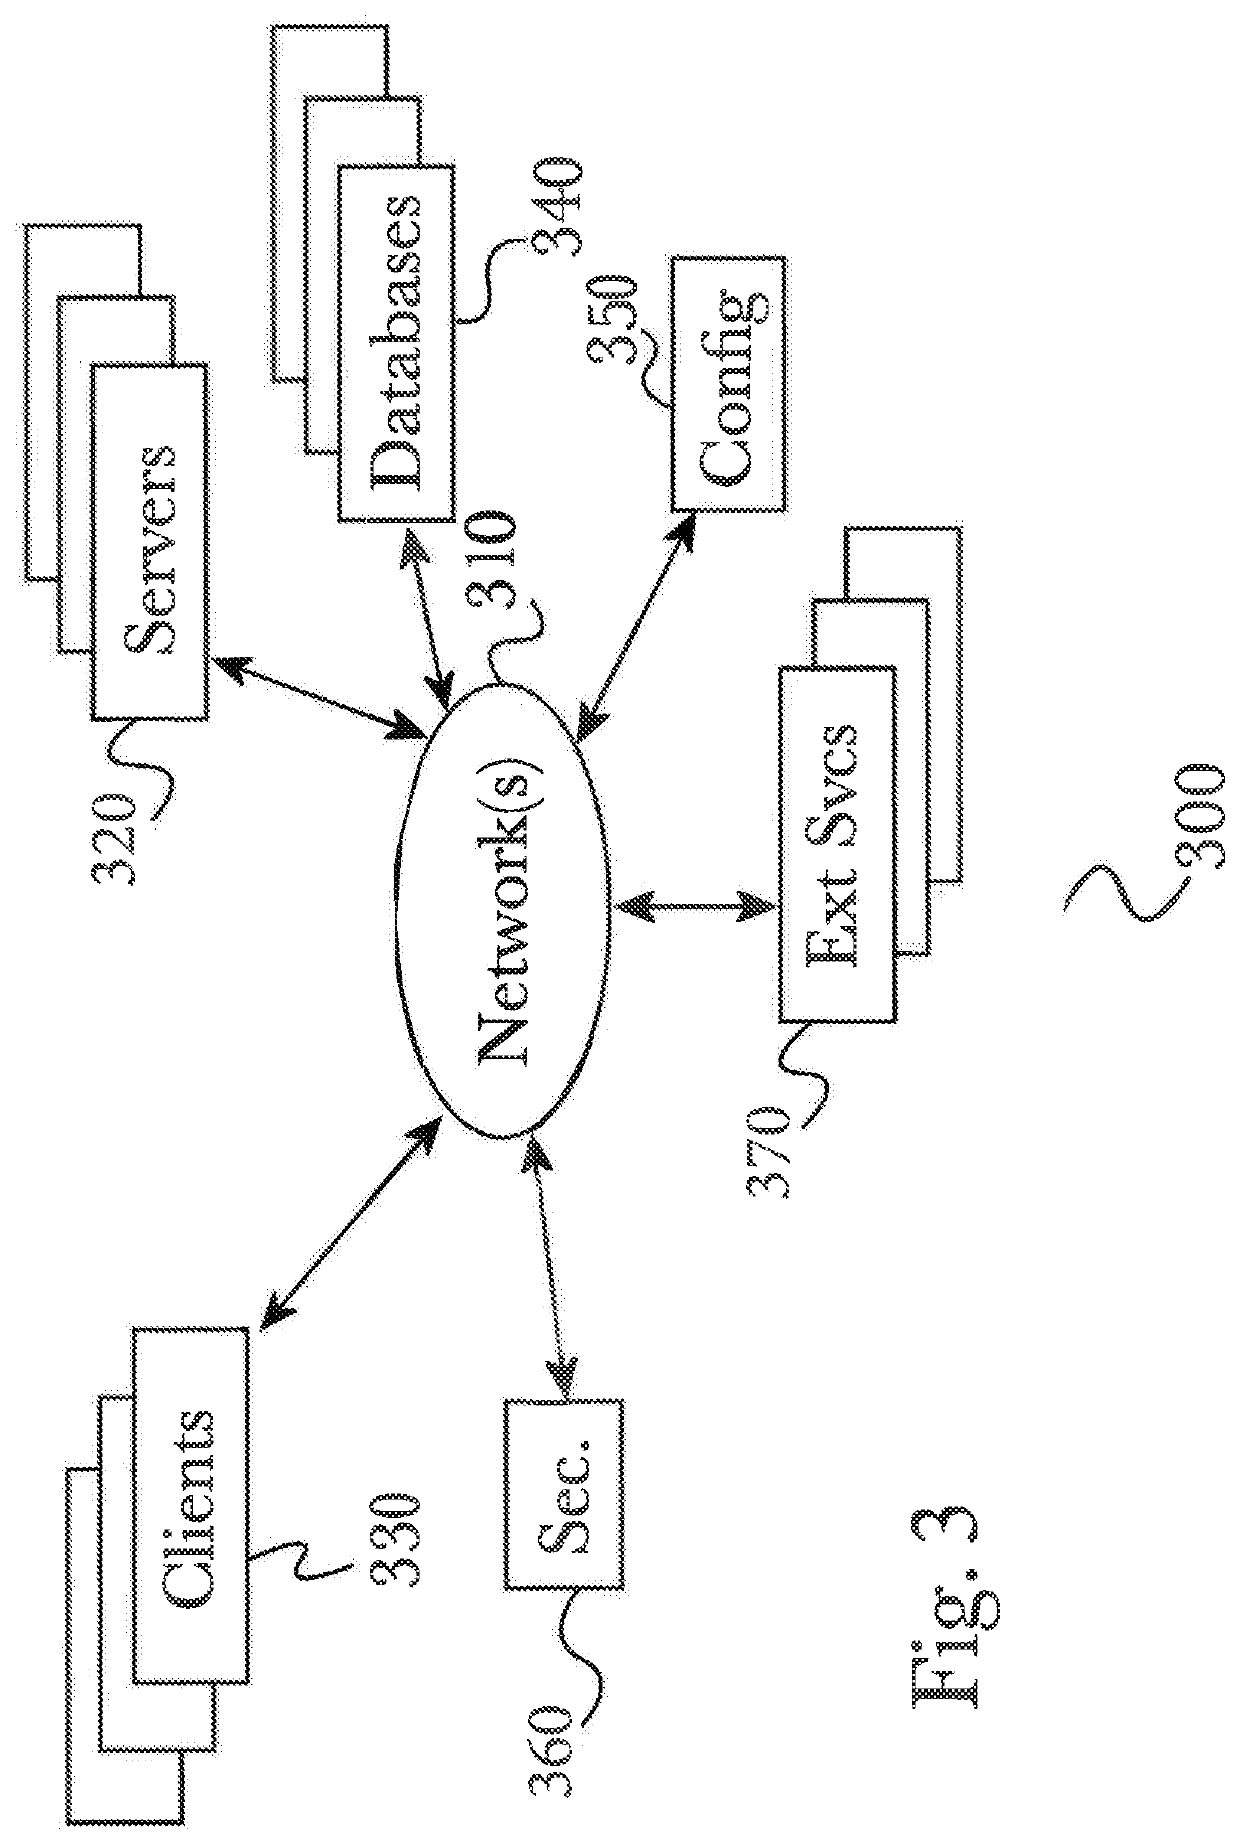 Pathfinding in two and three-dimensional spaces using an automated planning service